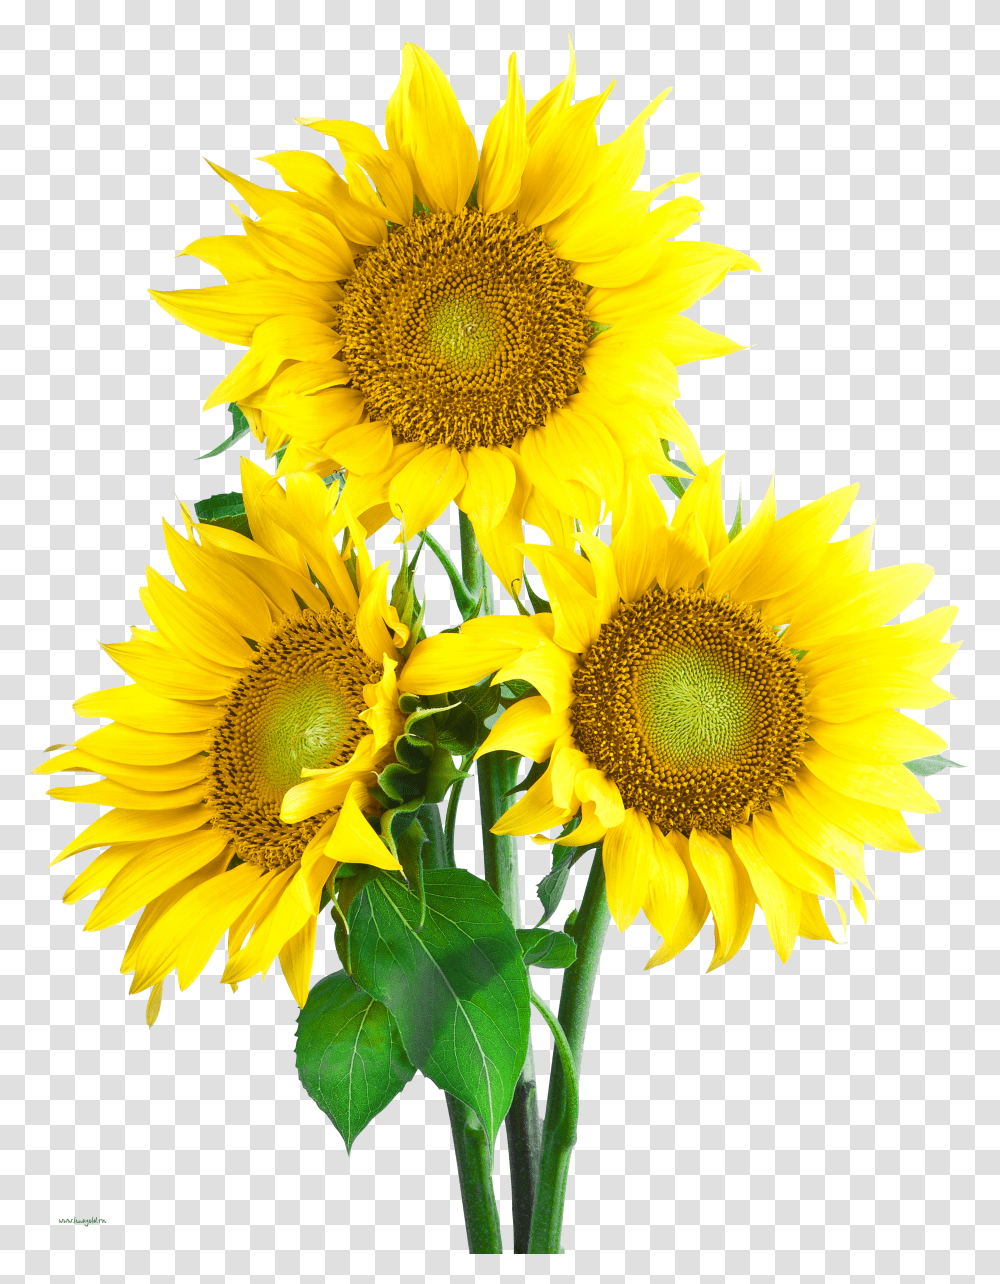 Sunflower Image With Transpa Background Transparent Png